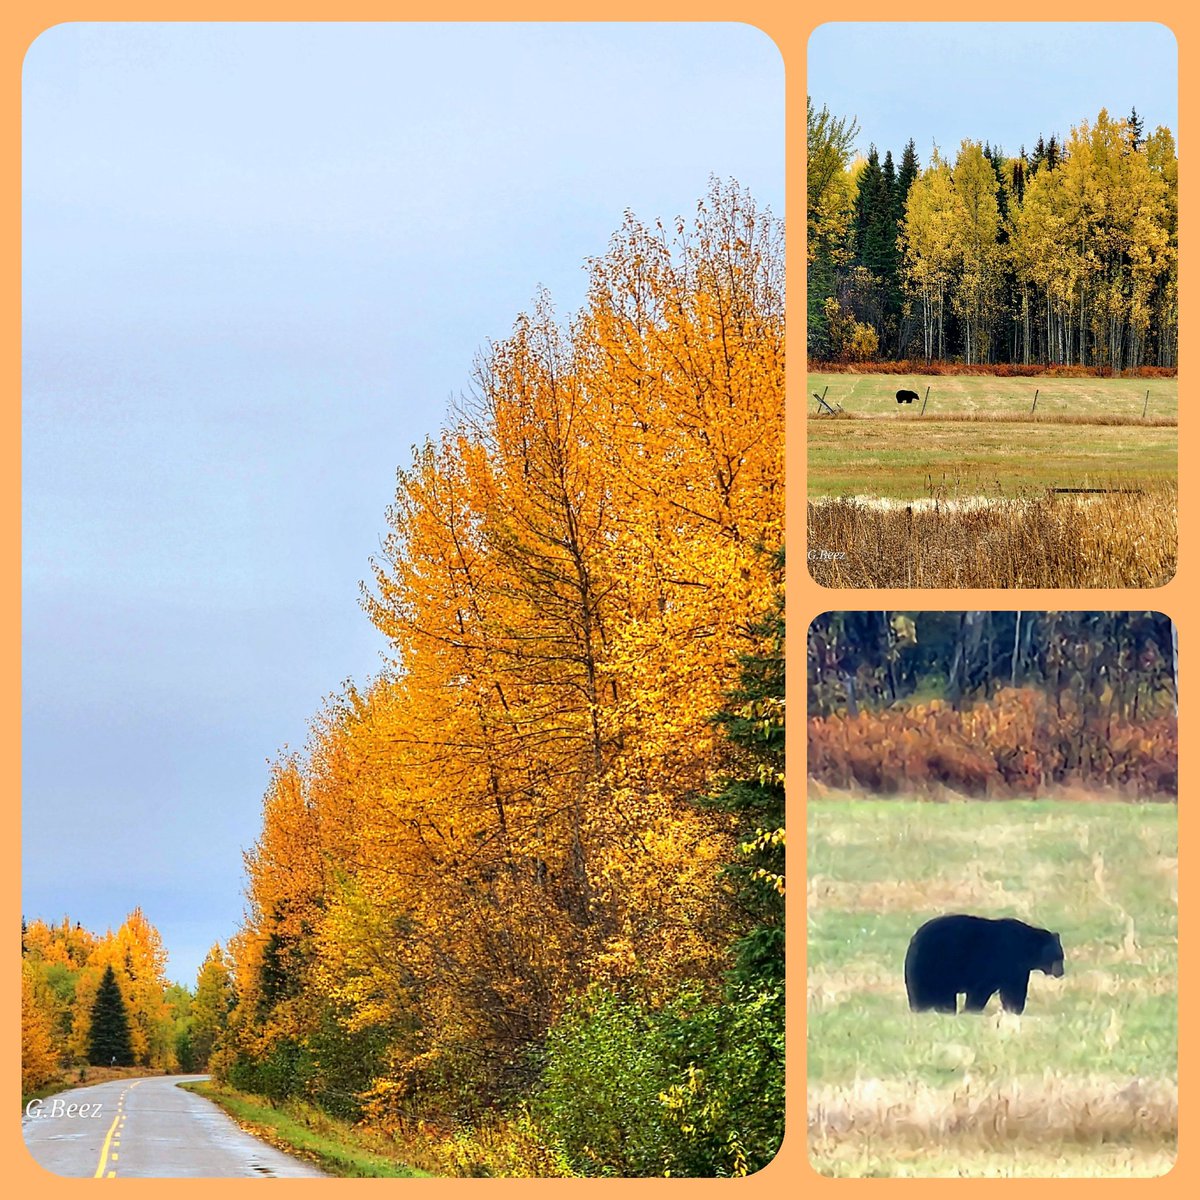 Spotted a black bear on my drive home from town this afternoon, a few more weeks and they'll be hibernating but for now we are sharing in Autumn's glorious show🙂🐻🍂🍁#bearcountry